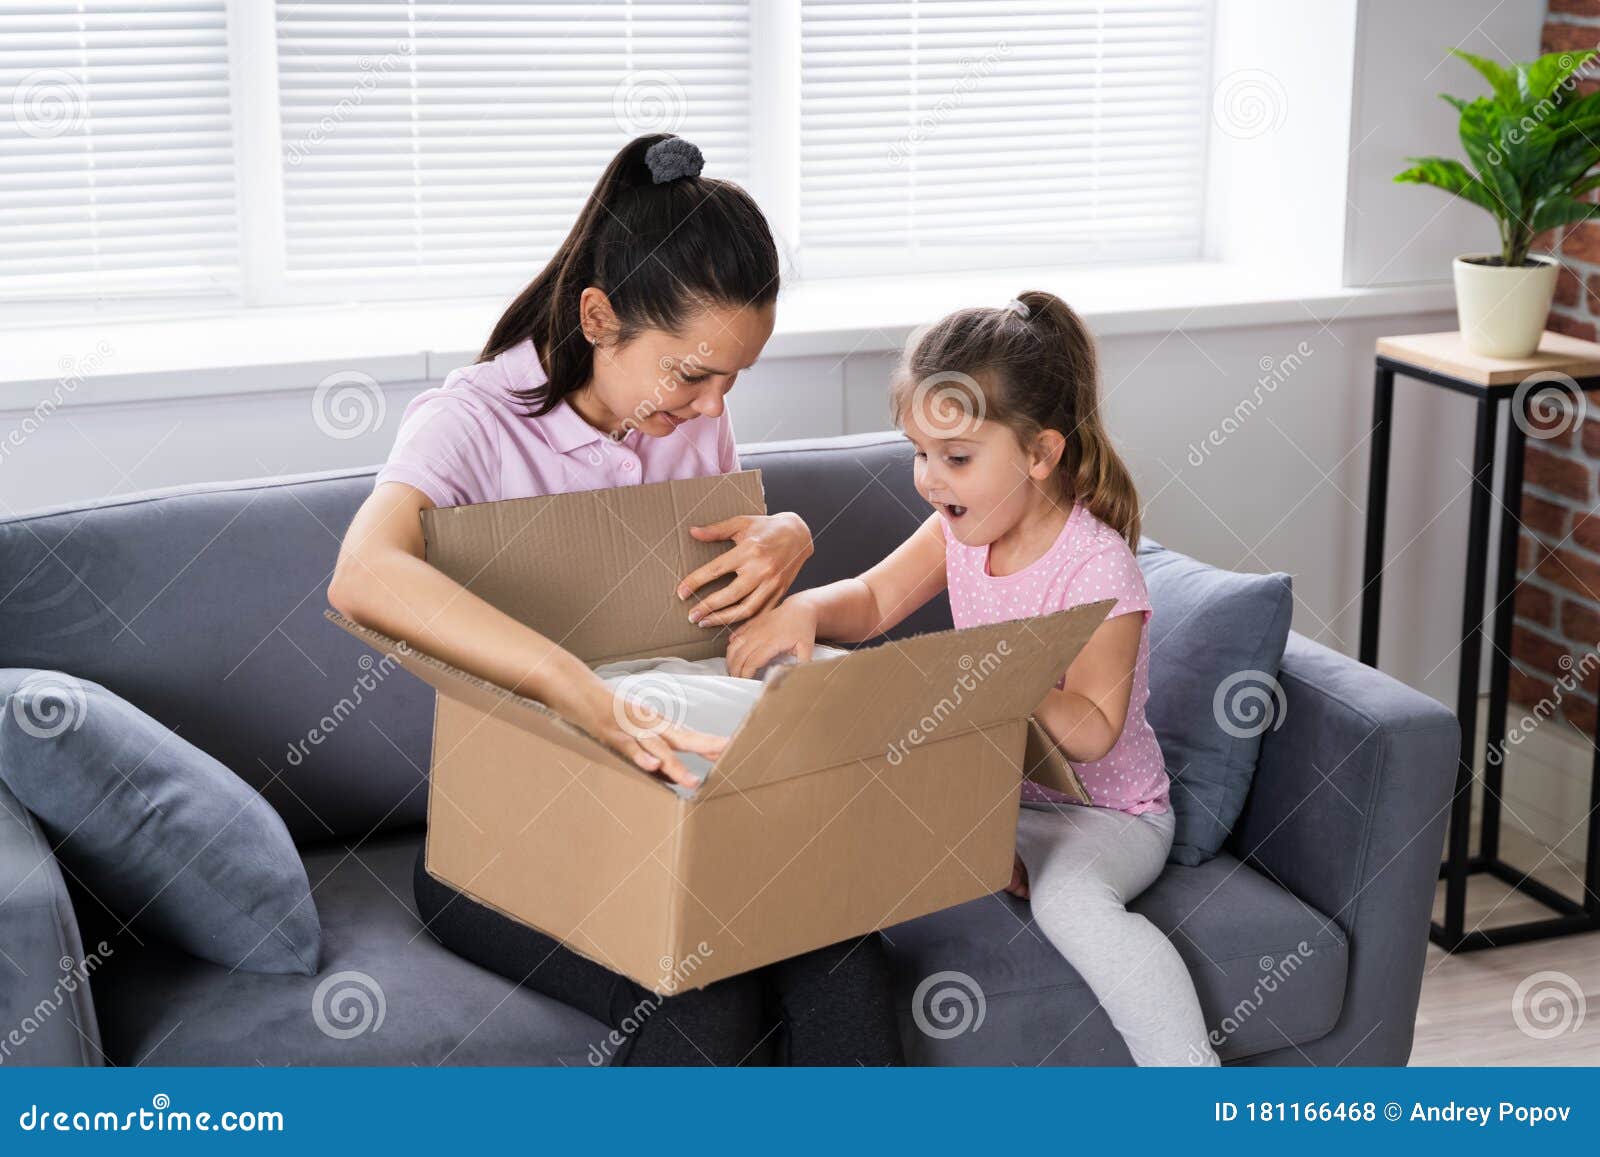 happy woman and kid opening received package